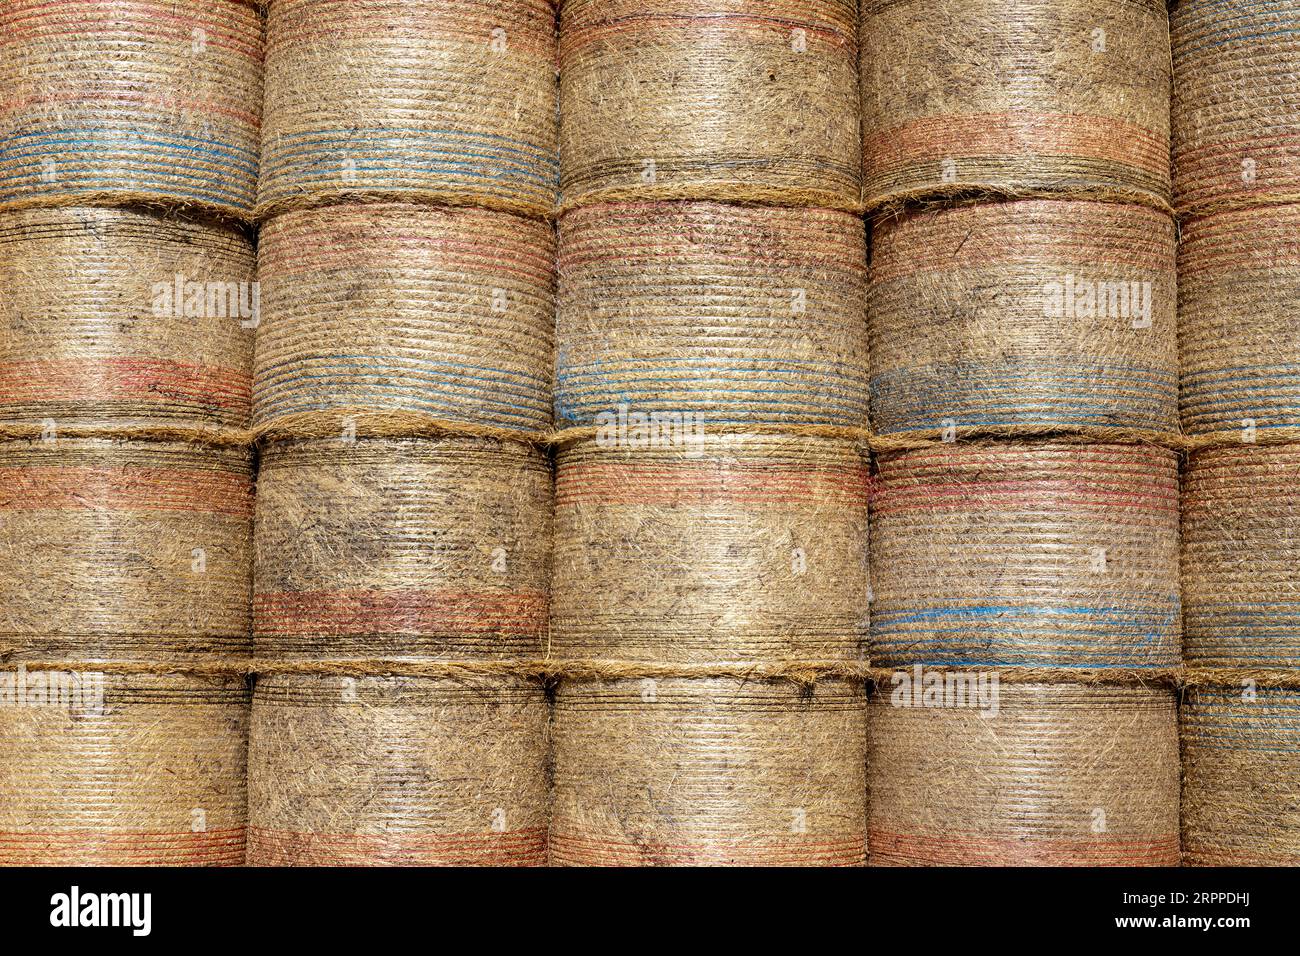 Stacked round yellow hay bales tightly bound in red, white and blue plastic threading in the italian village of Santo Stefano. Stock Photo